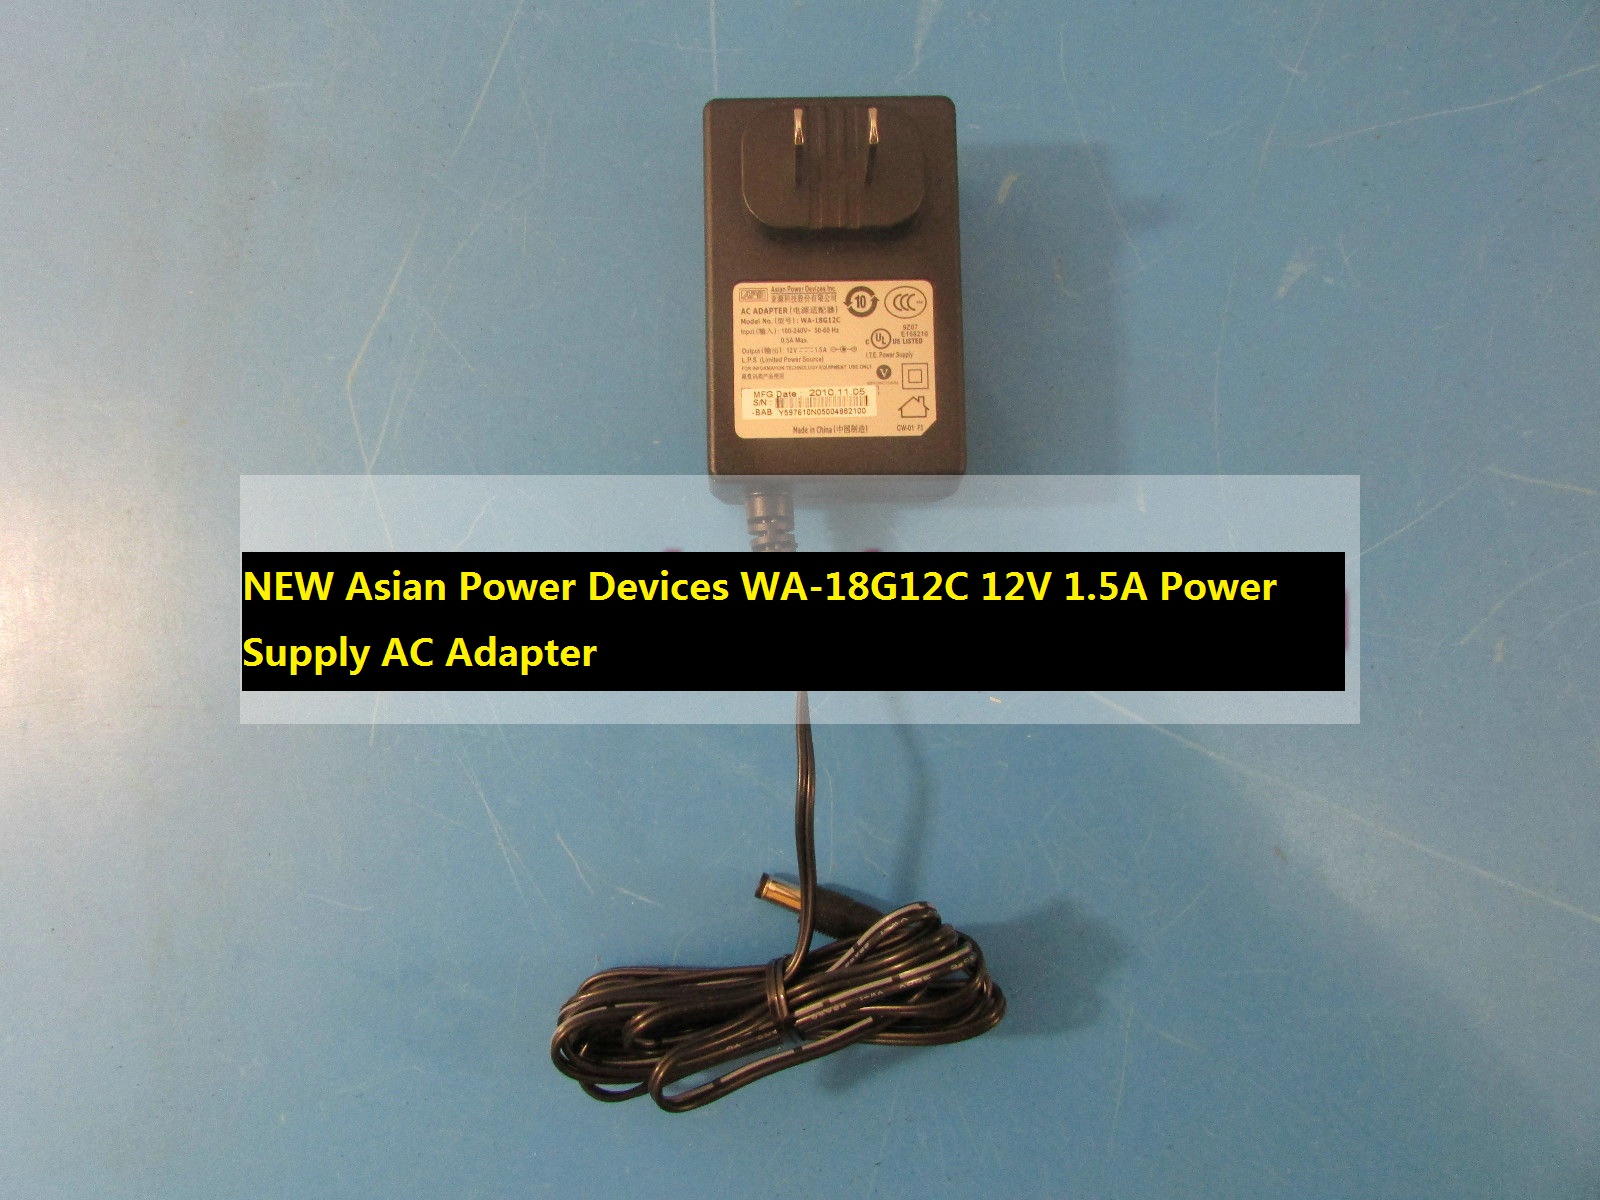 *Brand NEW*Asian 12V 1.5A AC Adapter Power Devices WA-18G12C Power Supply